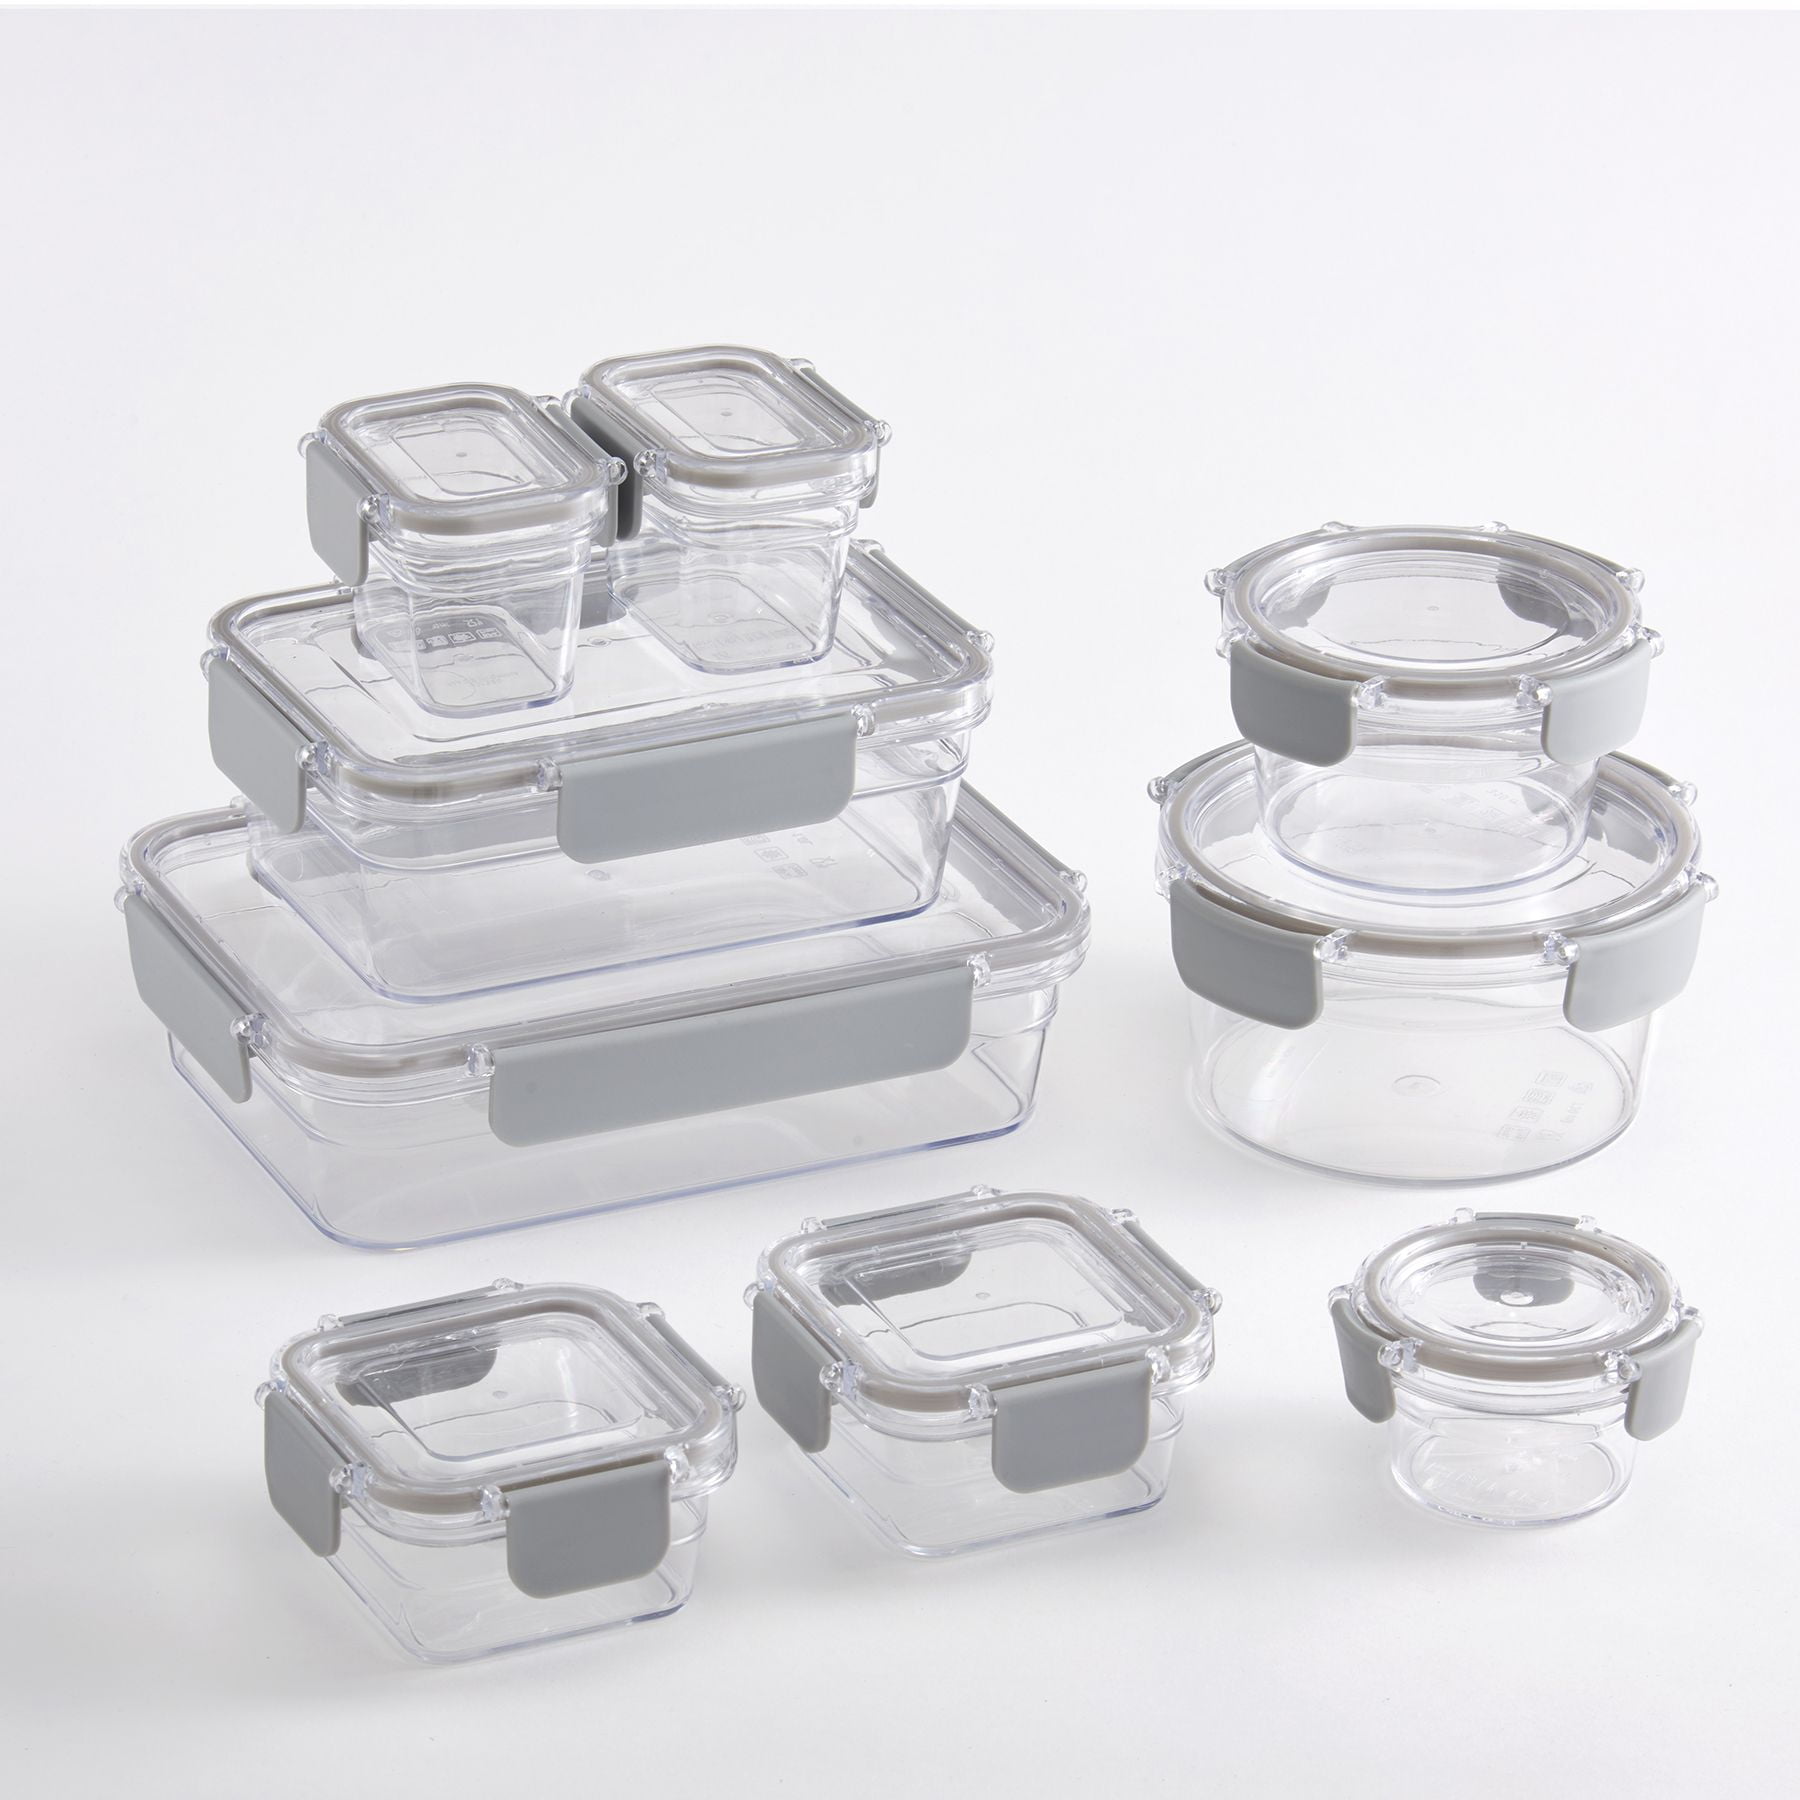 ColorLife Food Storage Container - Set of 16